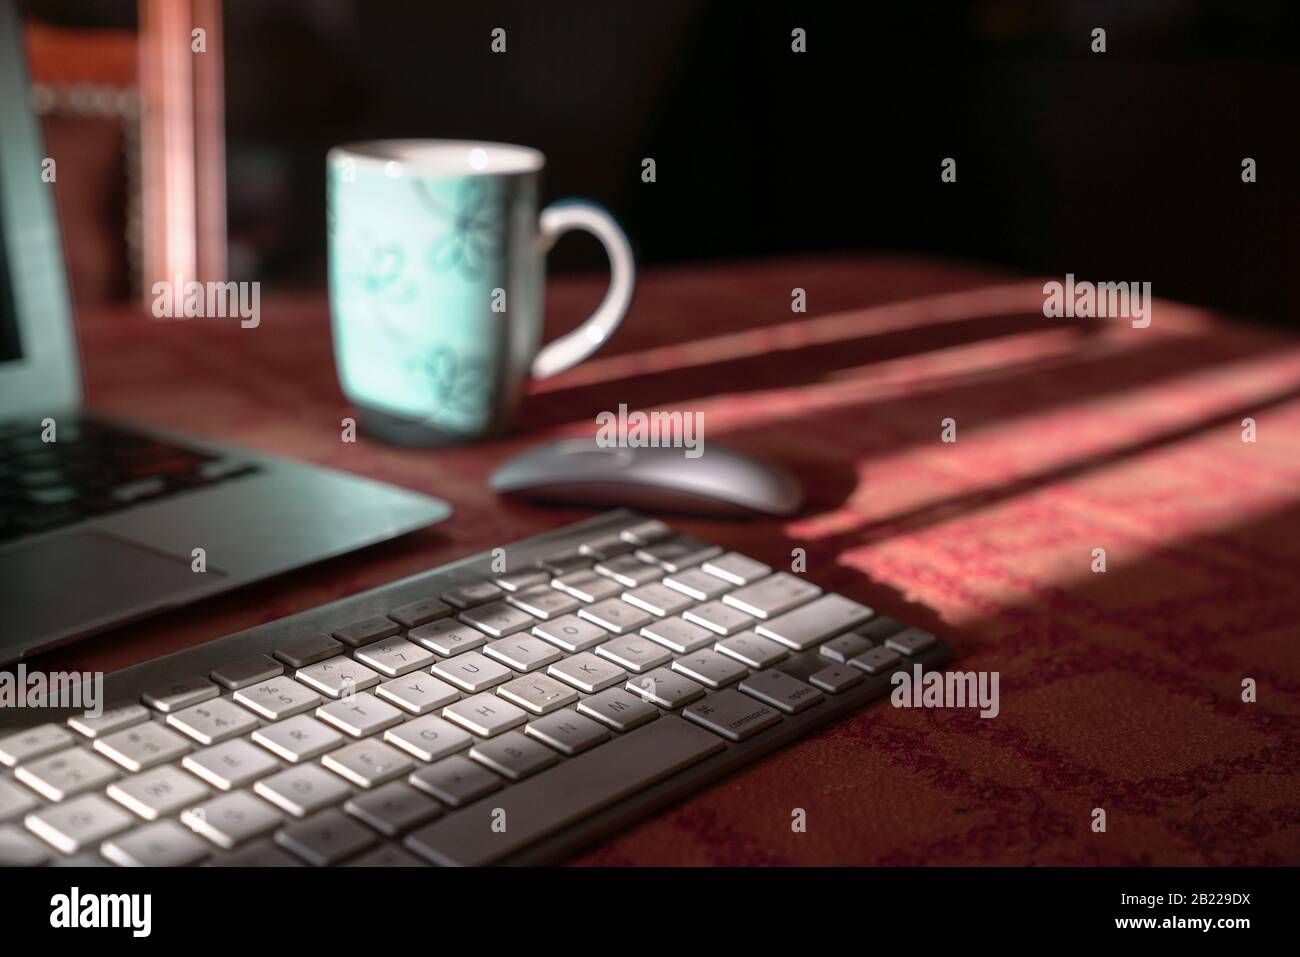 Laptop with wireless keyboard and mouse and coffee in cup. Work from home or technology concept. Stock Photo